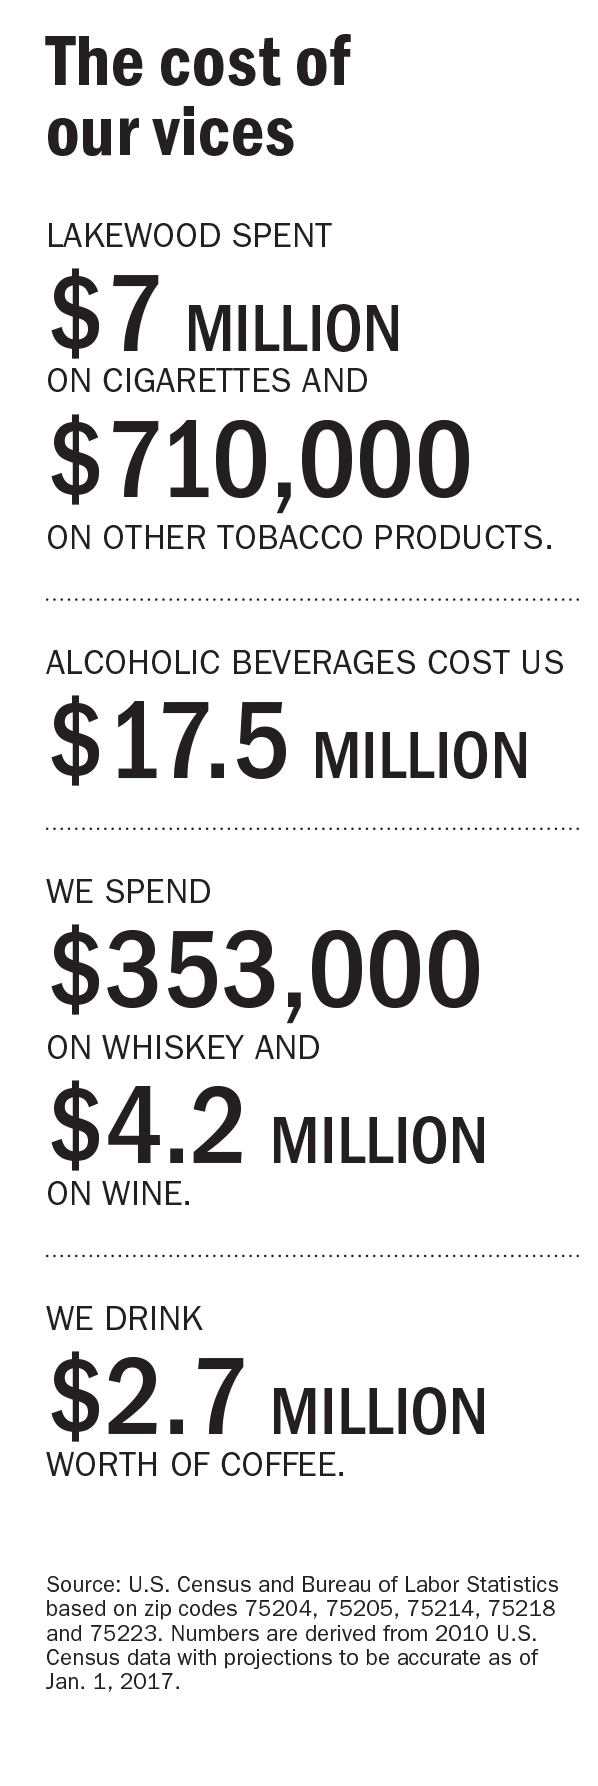 Go figure The cost of  our vices Lakewood spent $7 million on cigarettes and $710,000 on other tobacco products. Alcoholic beverages cost us $17.5 million We spend $353,000 on whiskey and $4.2 million on wine. We drink $2.7 million worth of coffee. Source: U.S. Census and Bureau of Labor Statistics based on zip codes 75204, 75205, 75214, 75218 and 75223. Numbers are derived from 2010 U.S. Census data with projections to be accurate as of Jan. 1, 2017.